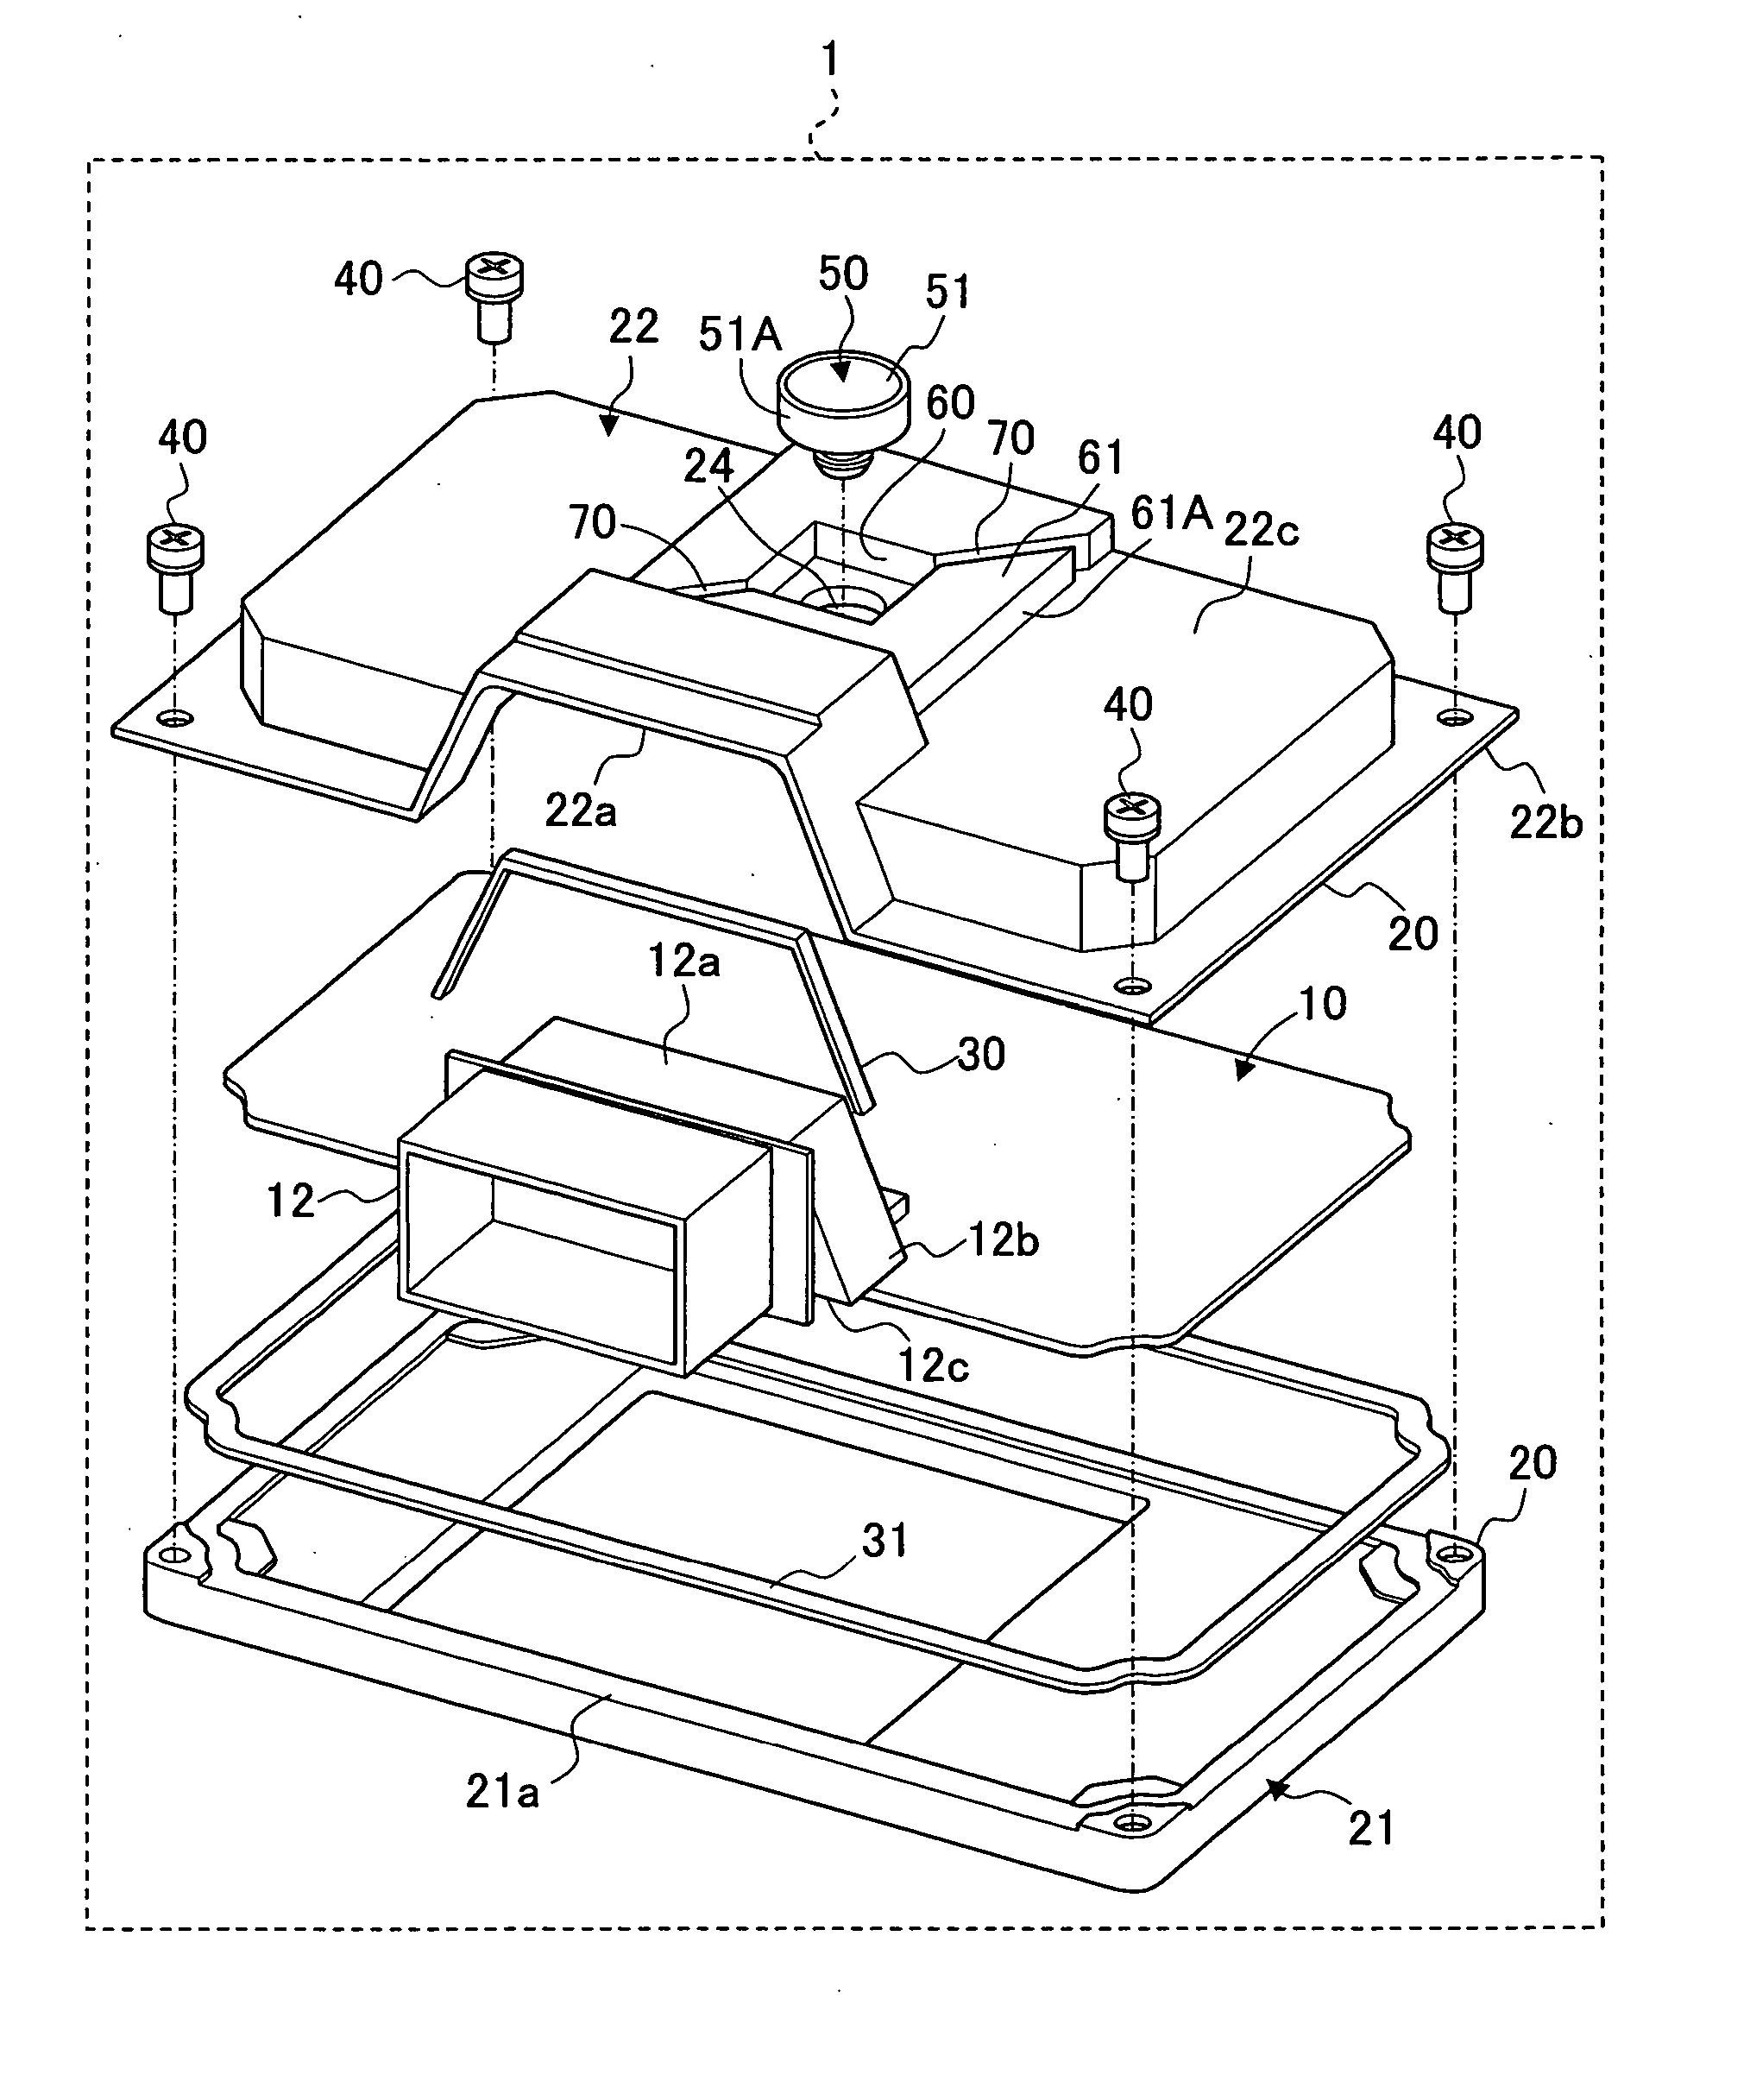 Electronic control unit and waterproof case